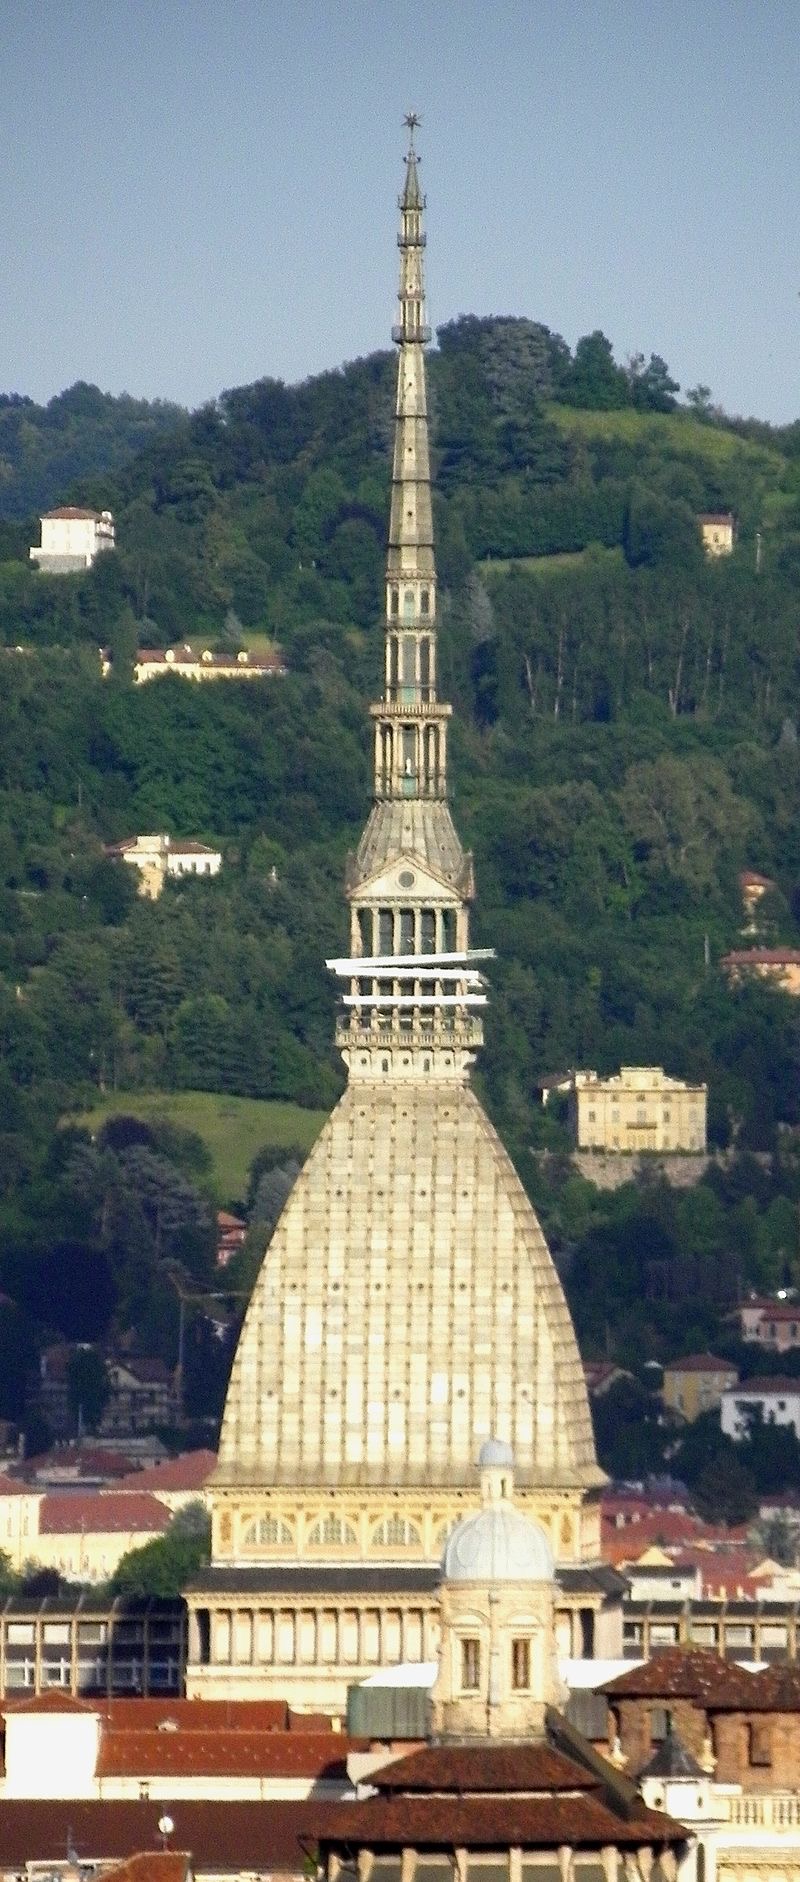 Torino’s most iconic landmark, the Mole Antonelliana houses the National Film Library. Photo from Wikipedia.